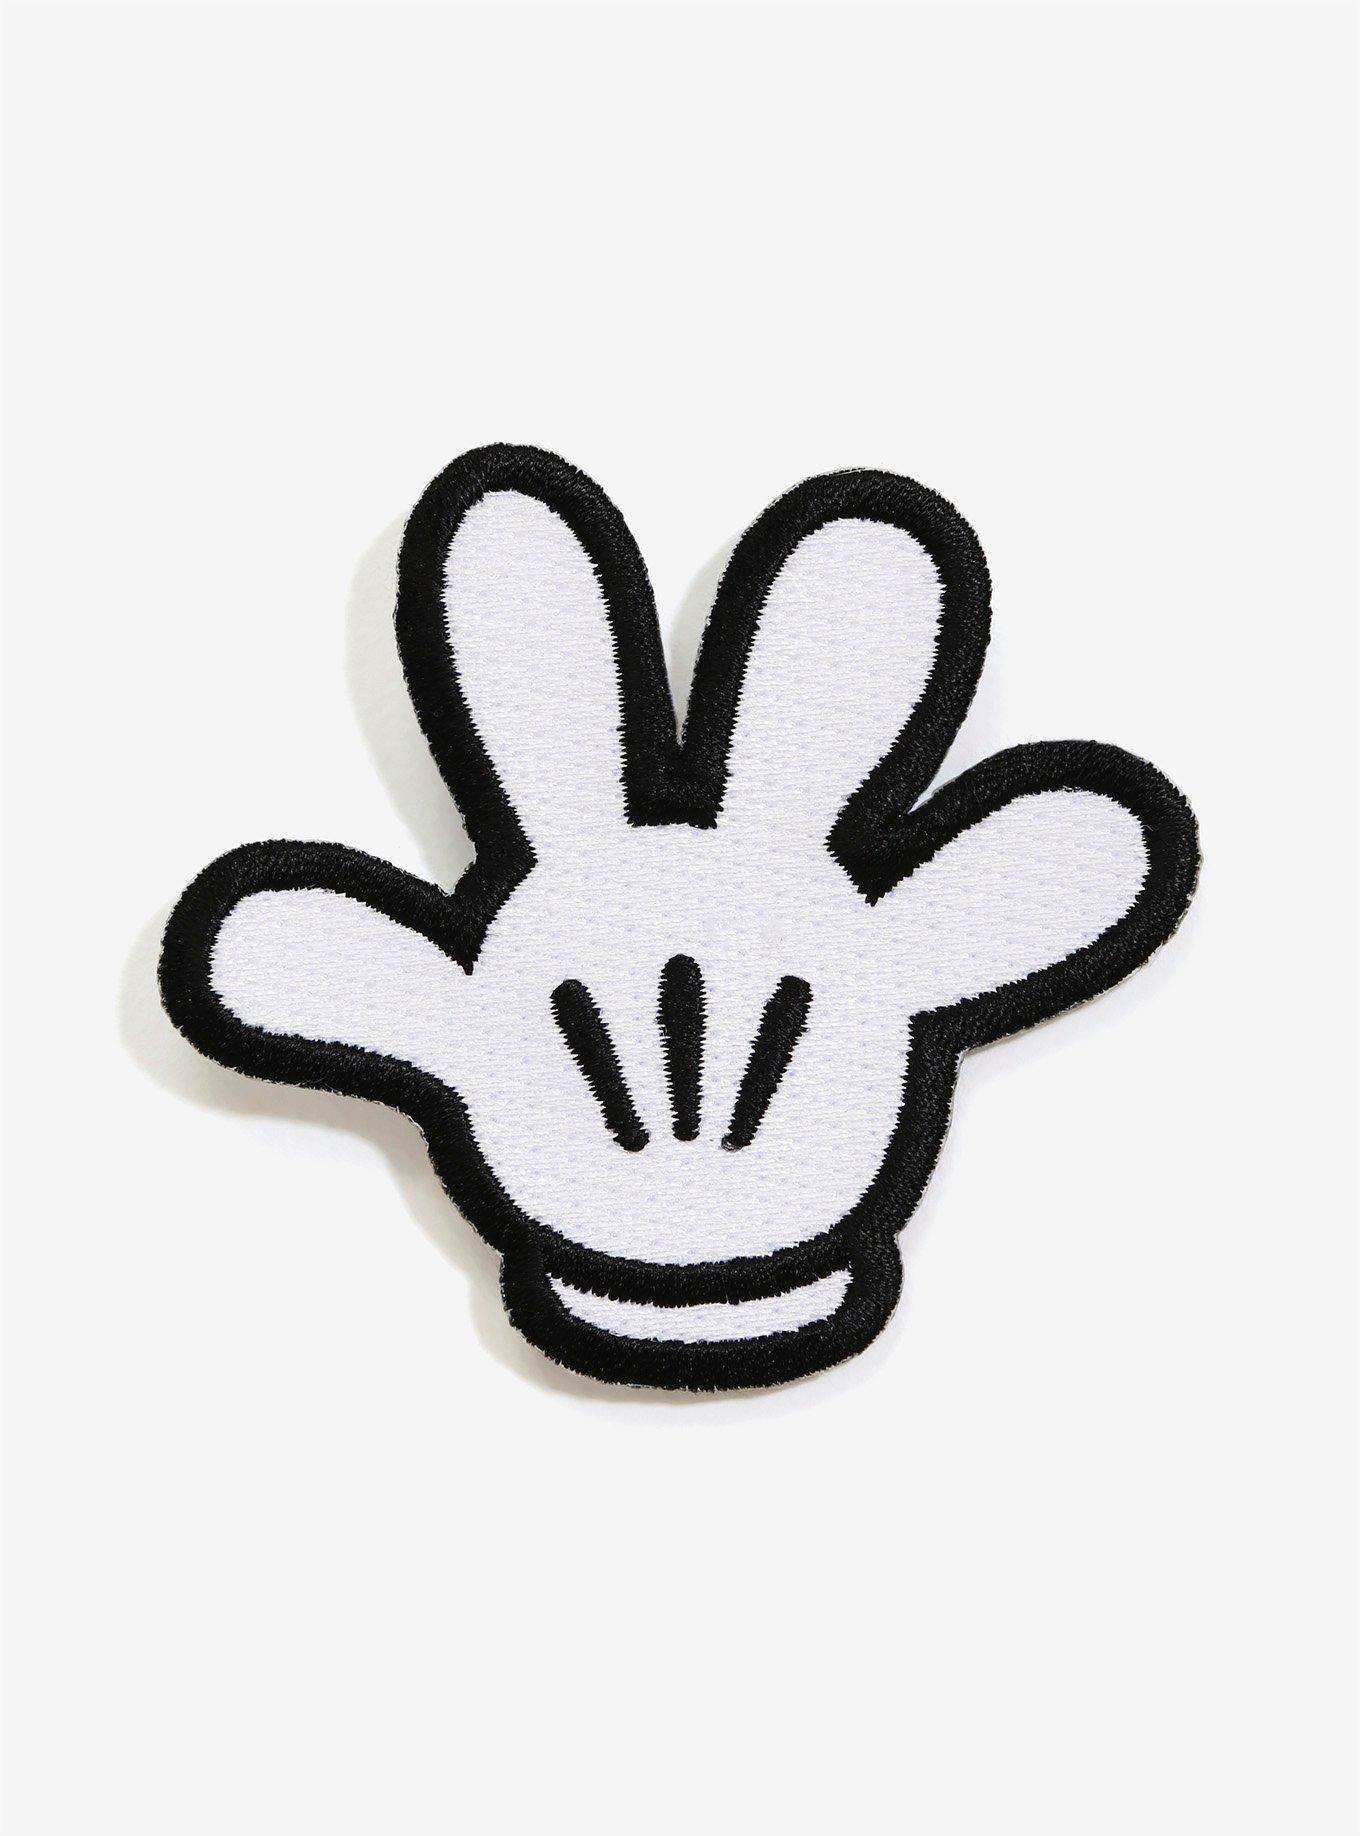 Disney Mickey Mouse Hand Iron-On Patch